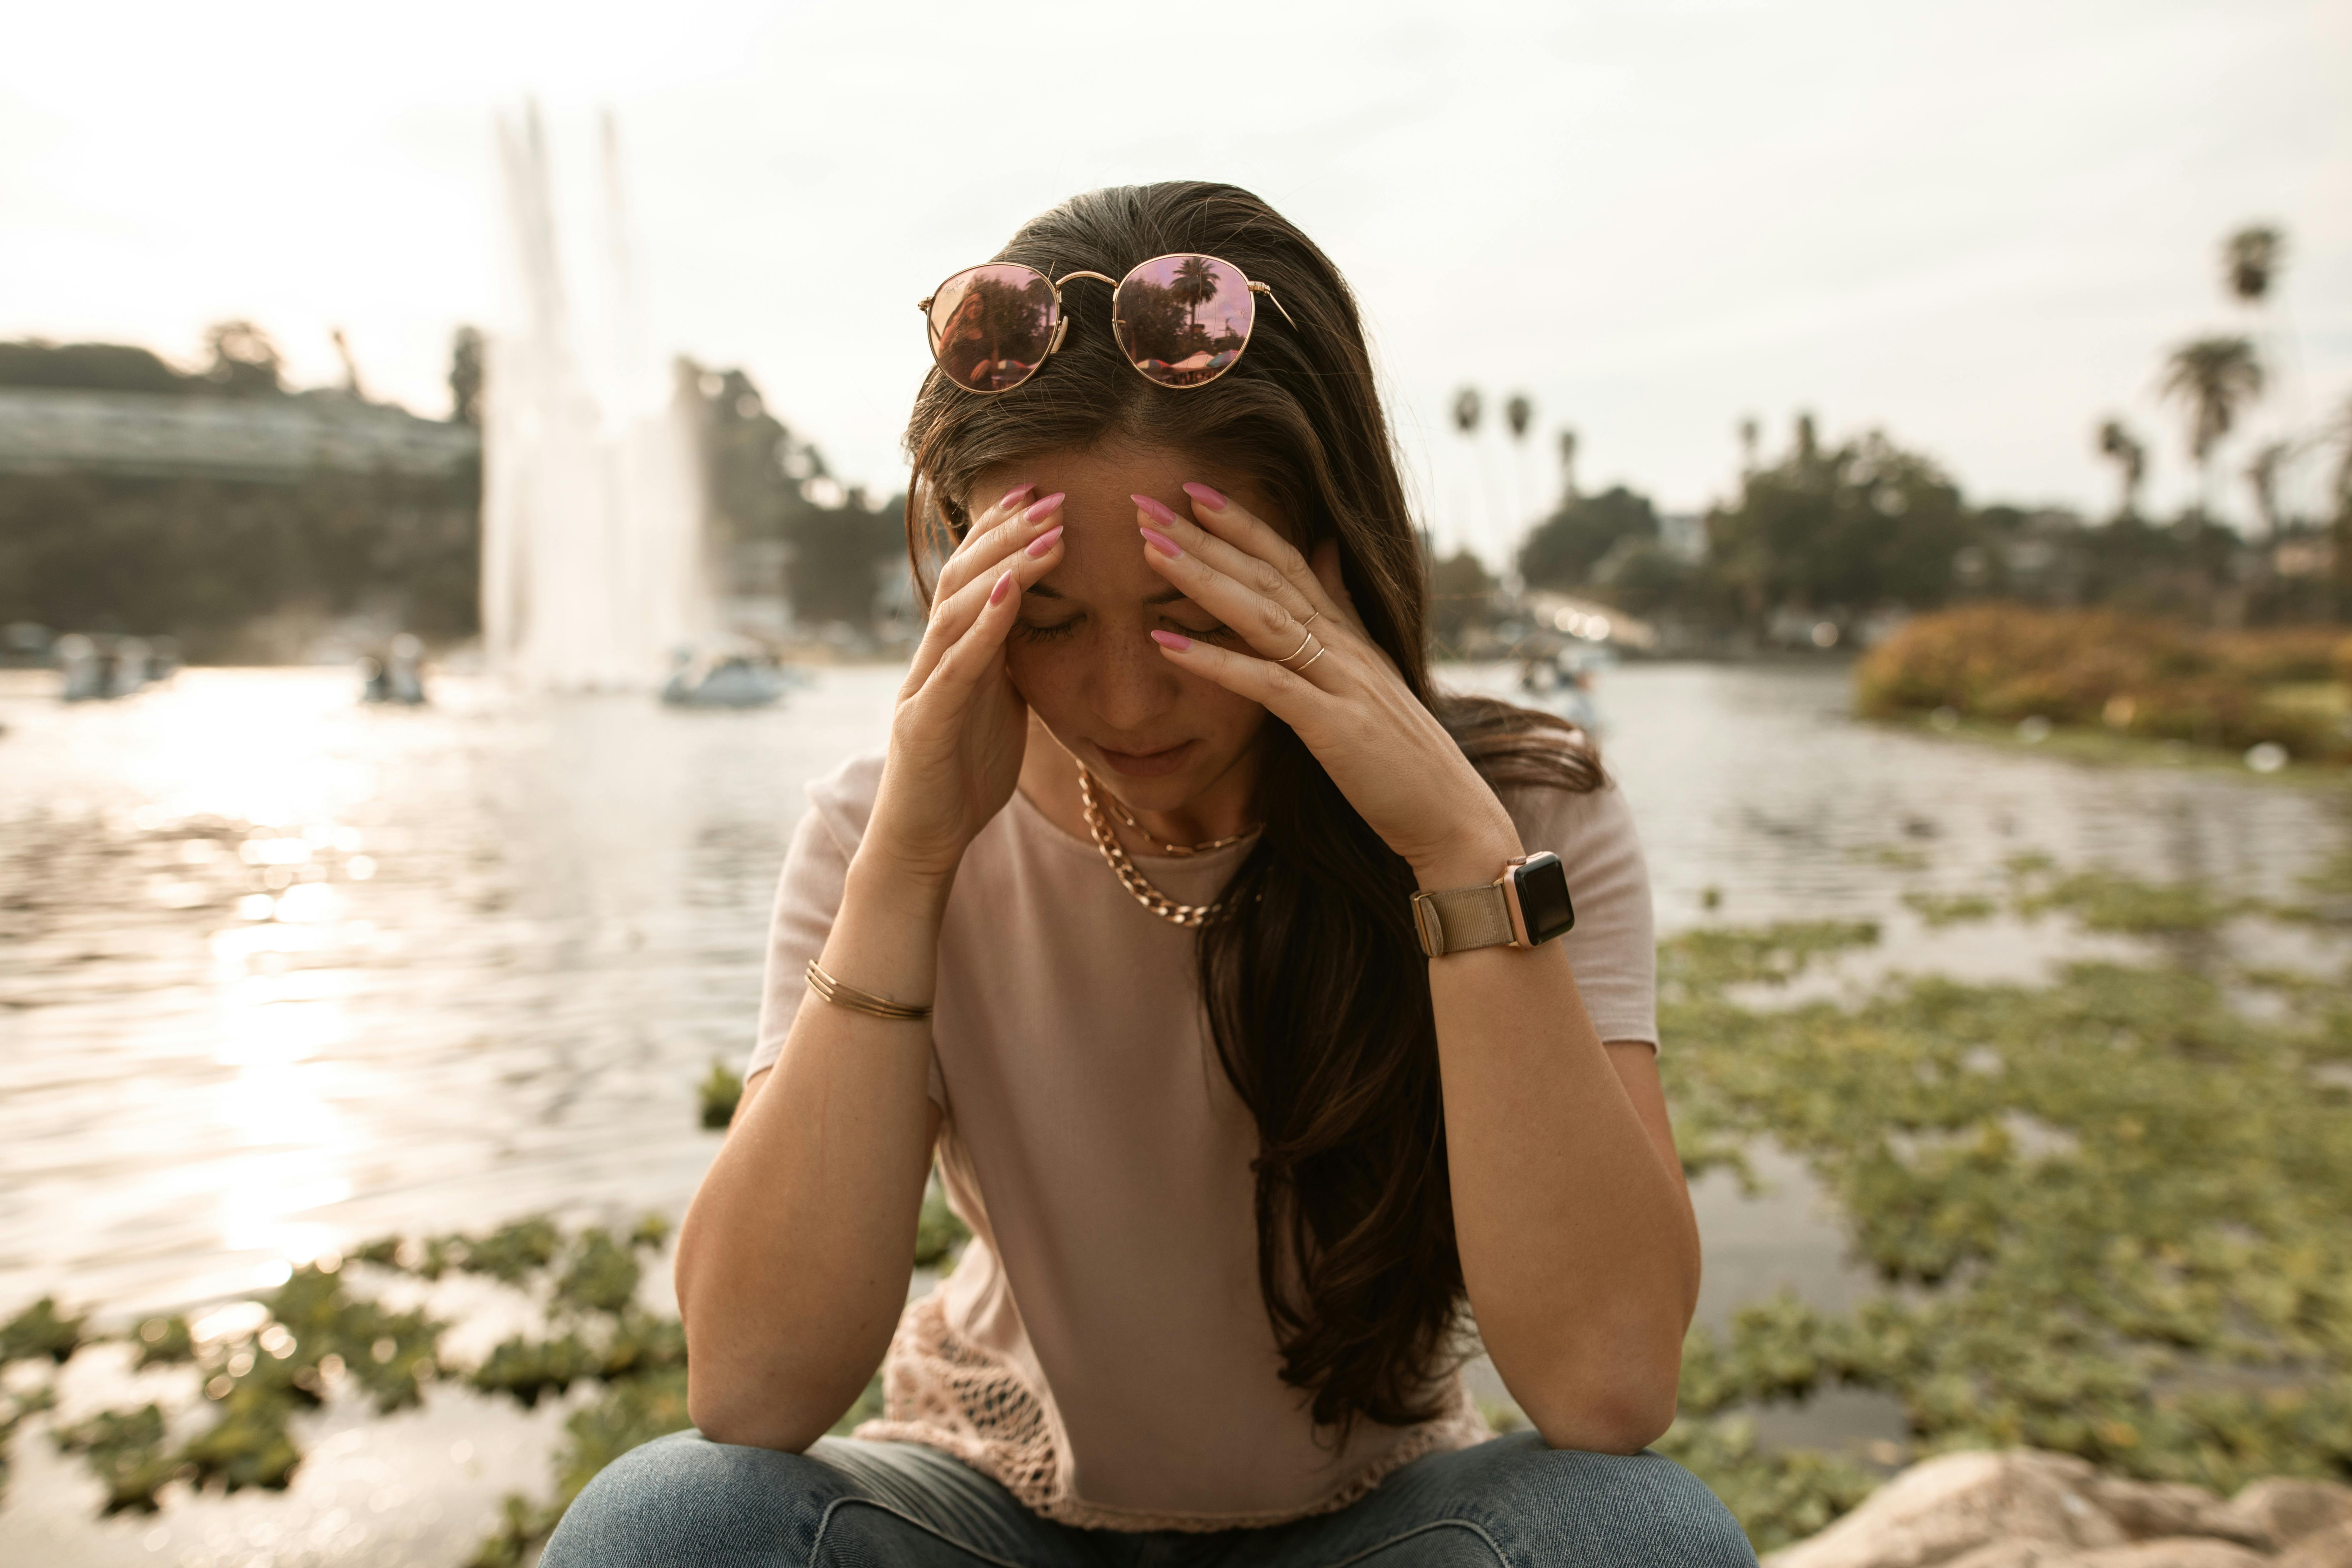 A distressed woman sitting on lakeside and touching face in despair | Source: Pexels